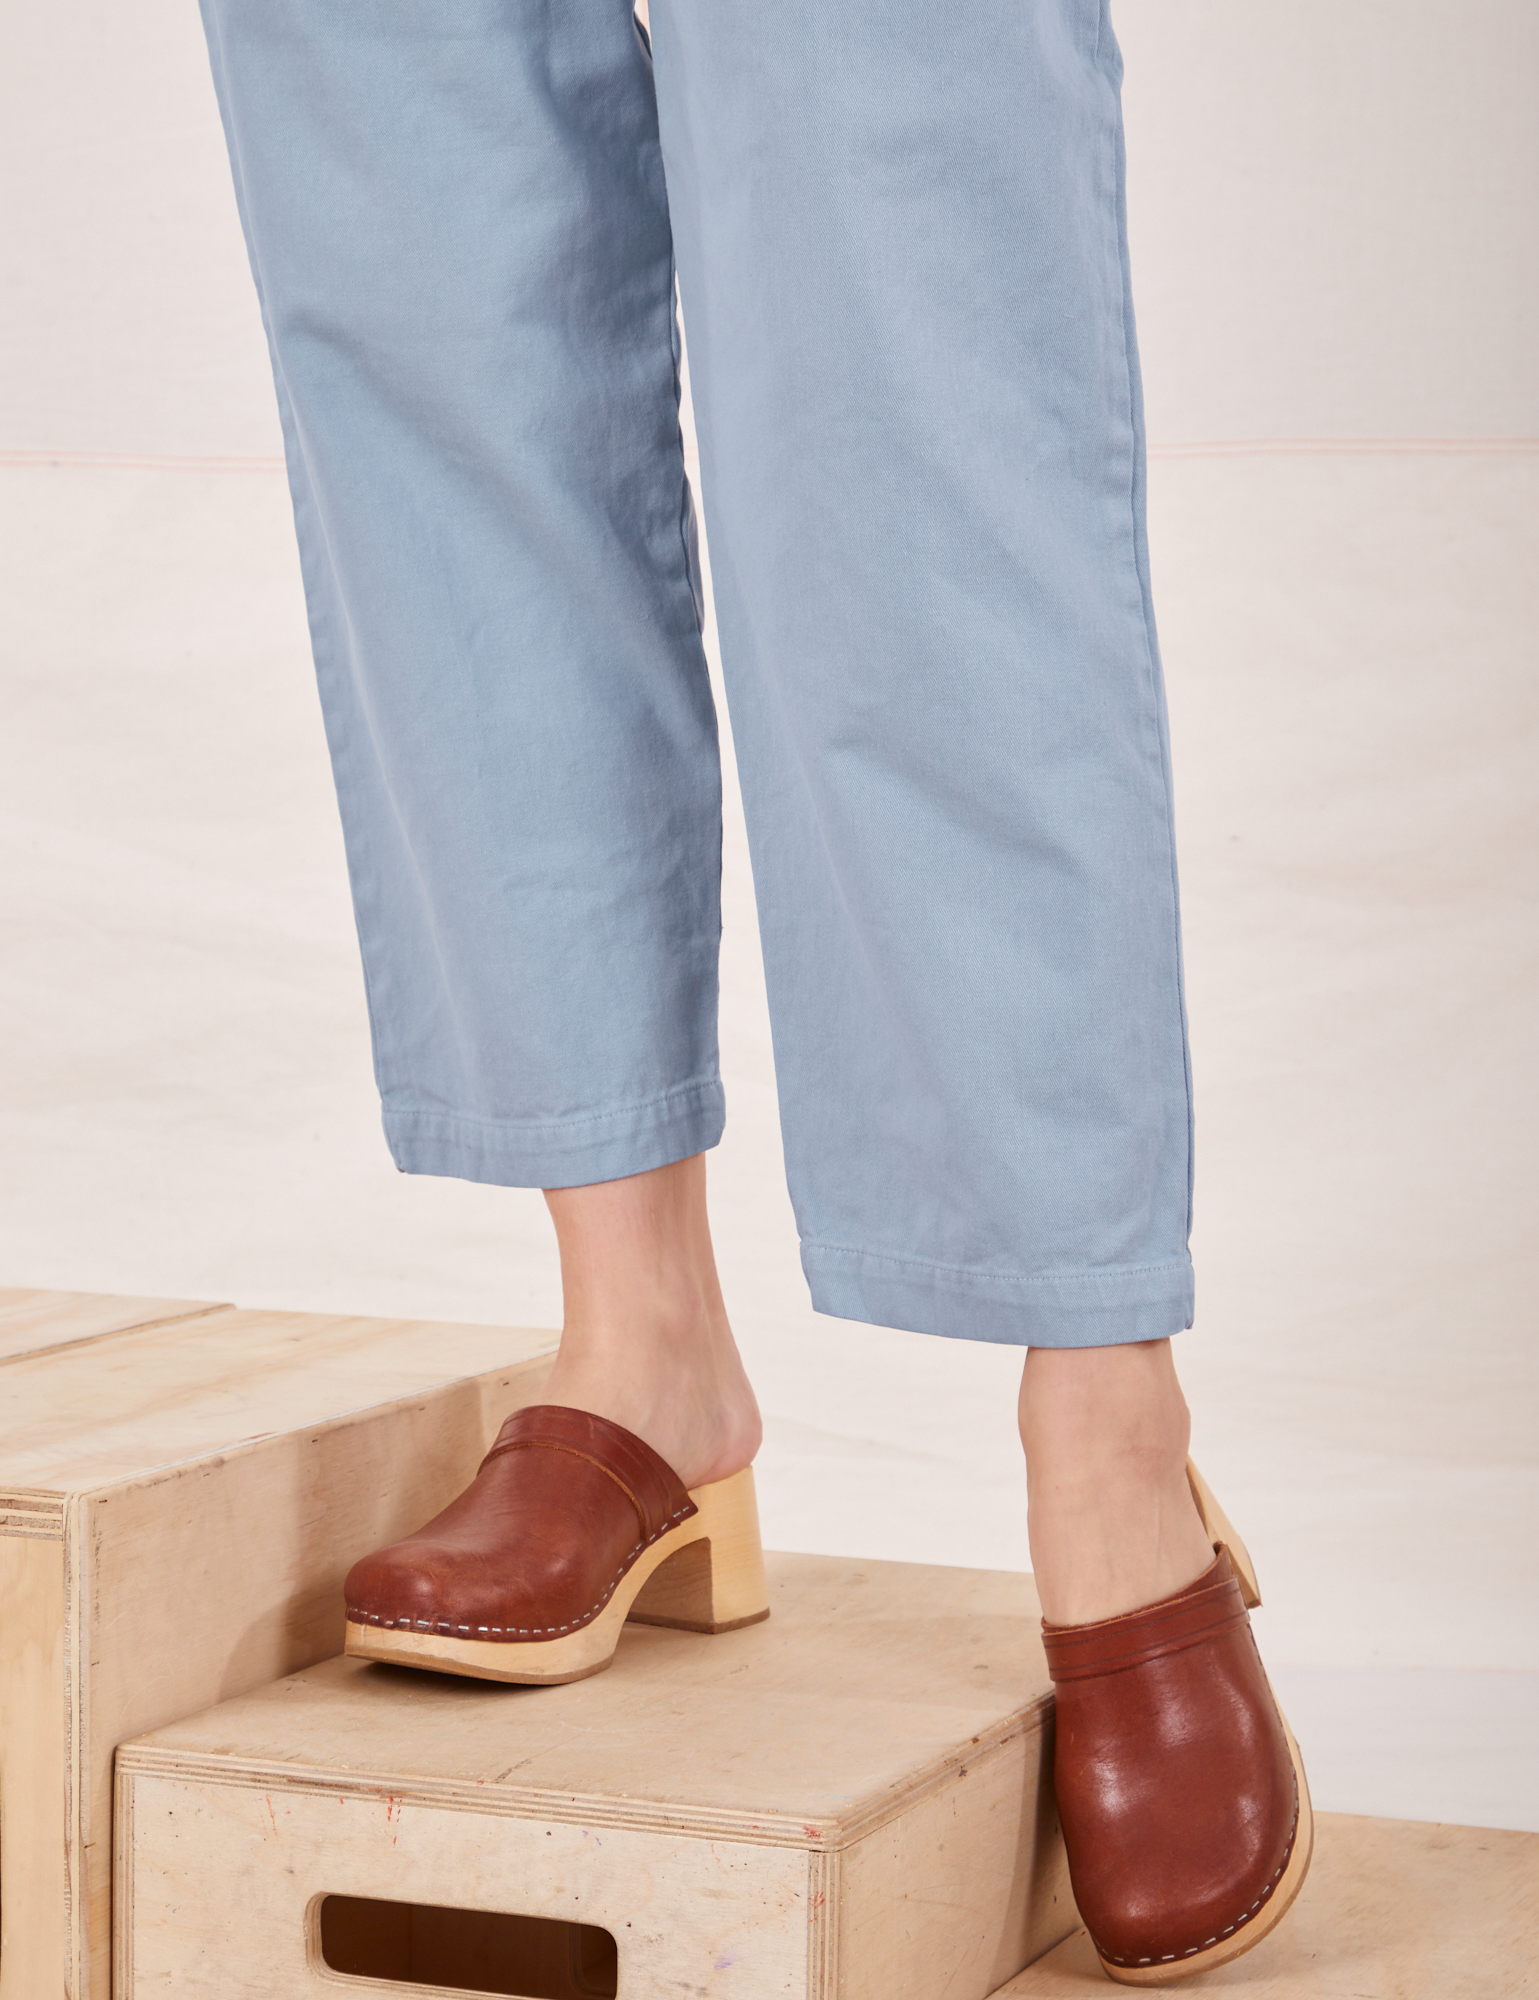 Heavyweight Trousers in Periwinkle pant leg close up on Alex